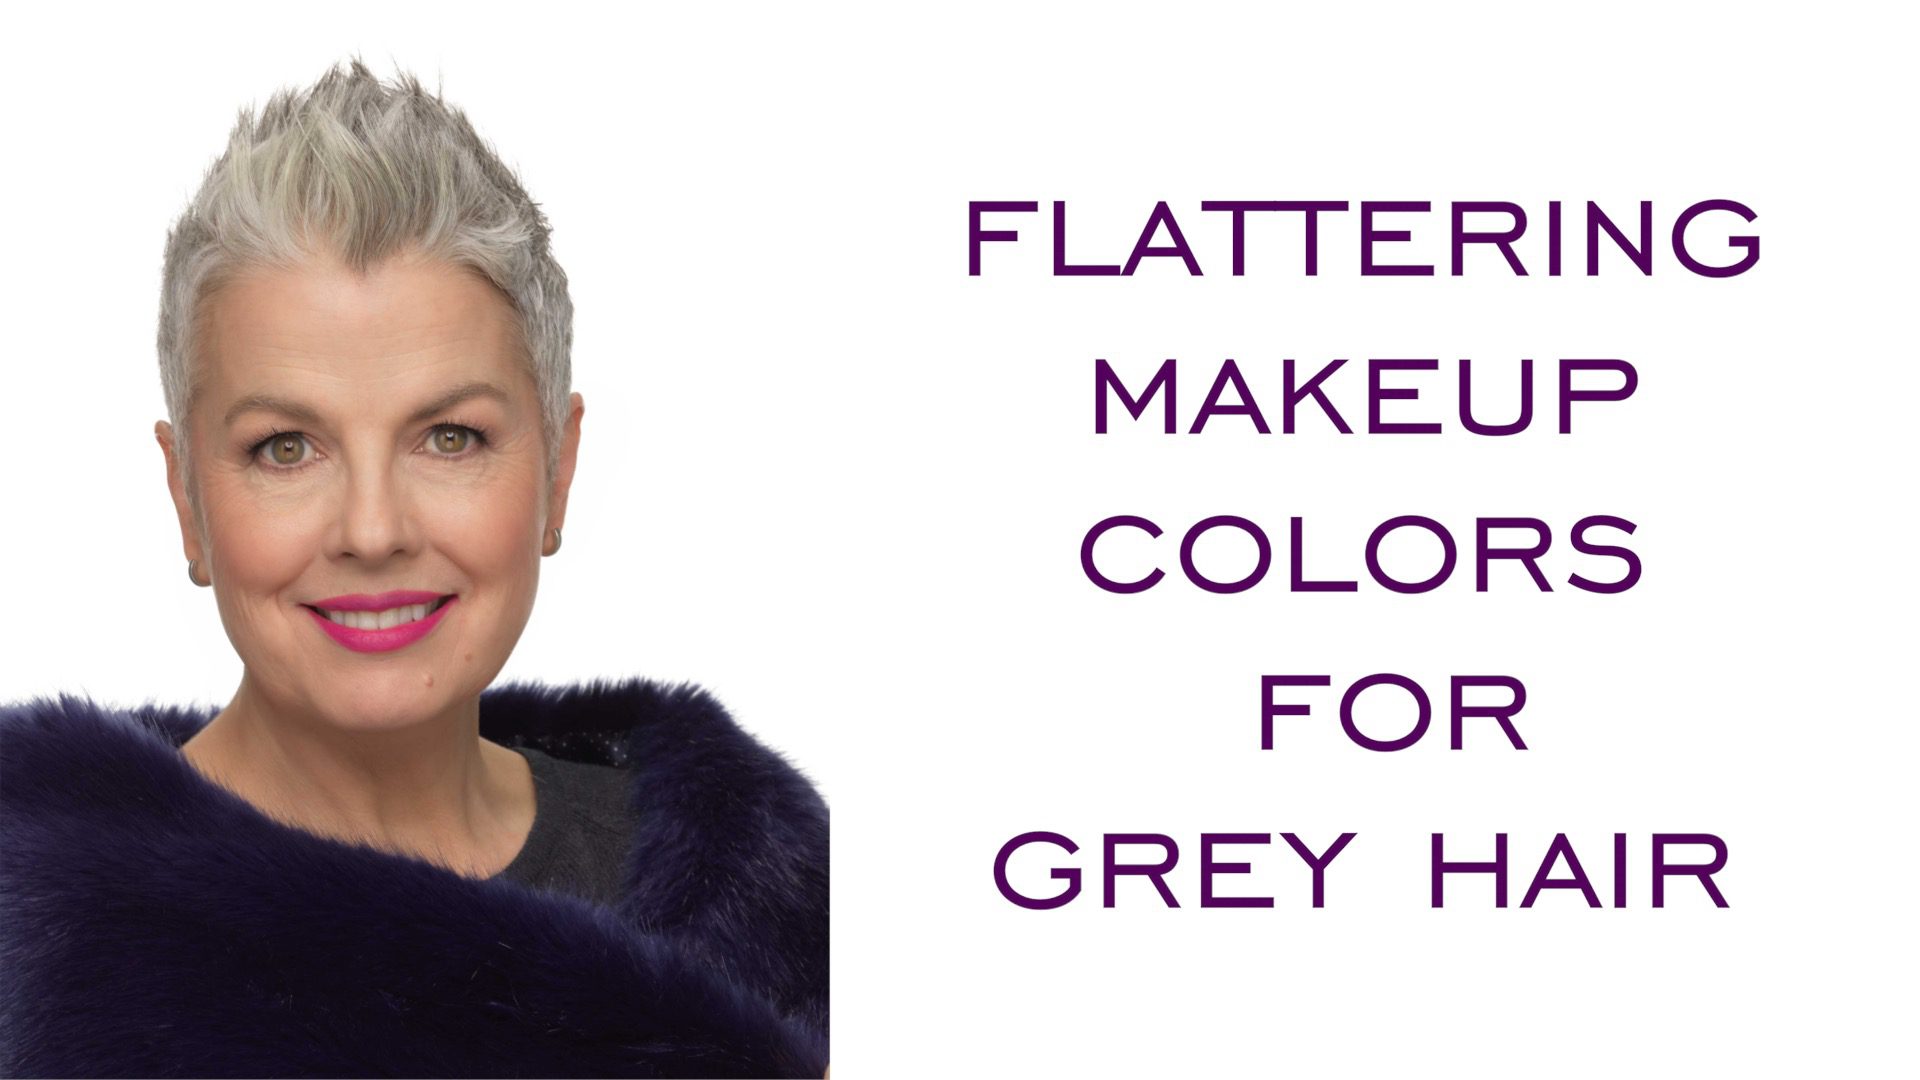 Flattering Makeup Colors for Grey Hair - Silver Style Studio